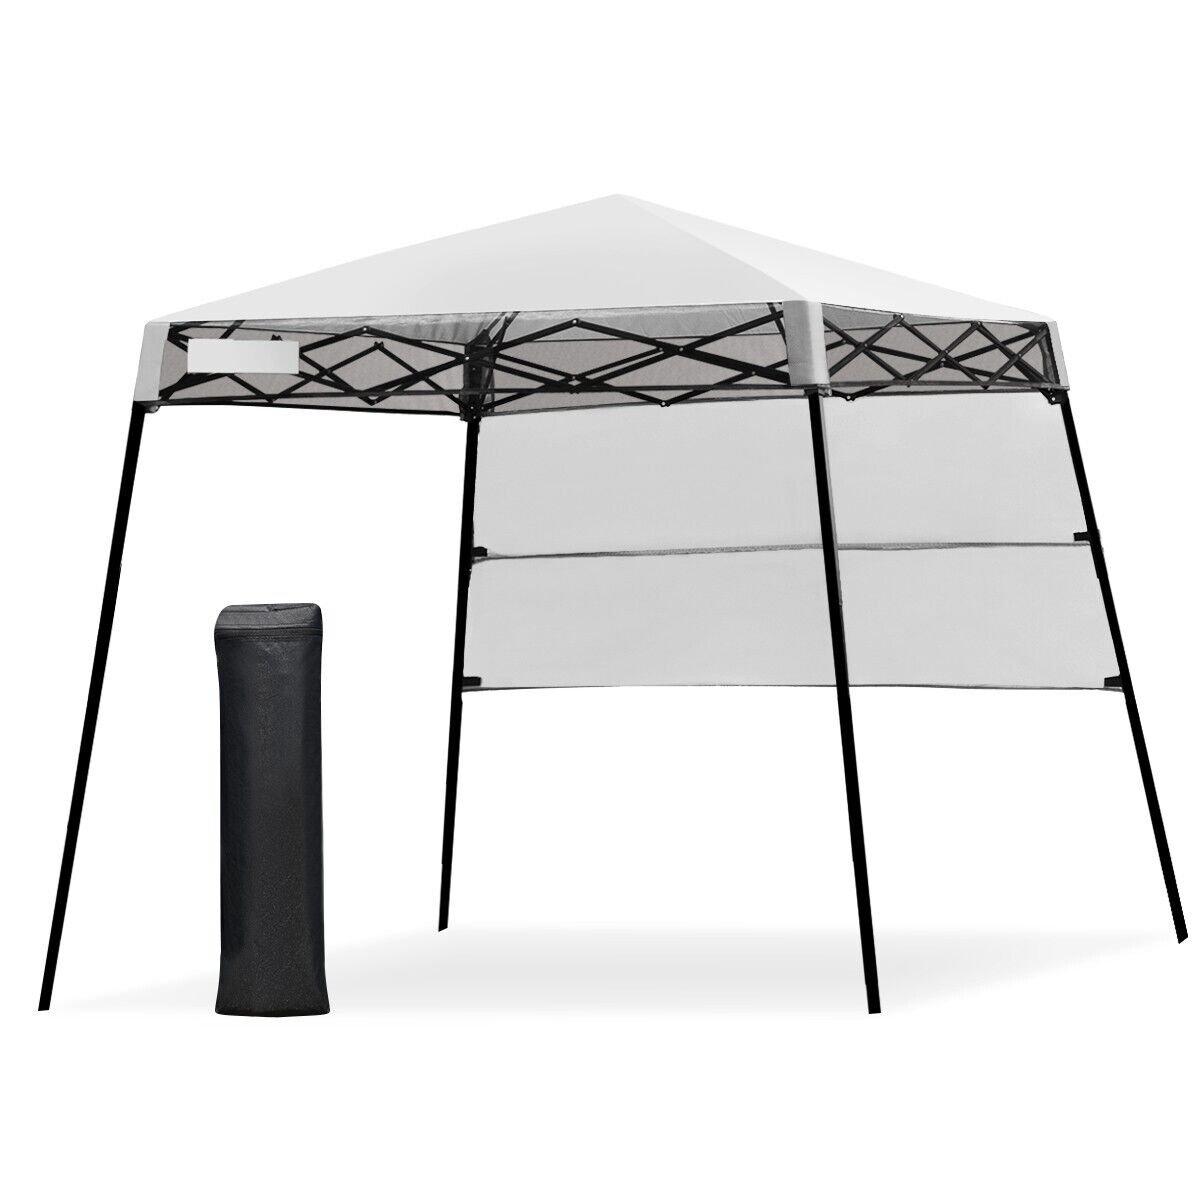 Slant Leg Pop-up Canopy Outdoor Tent Lightweight Shelter for Sun Protection